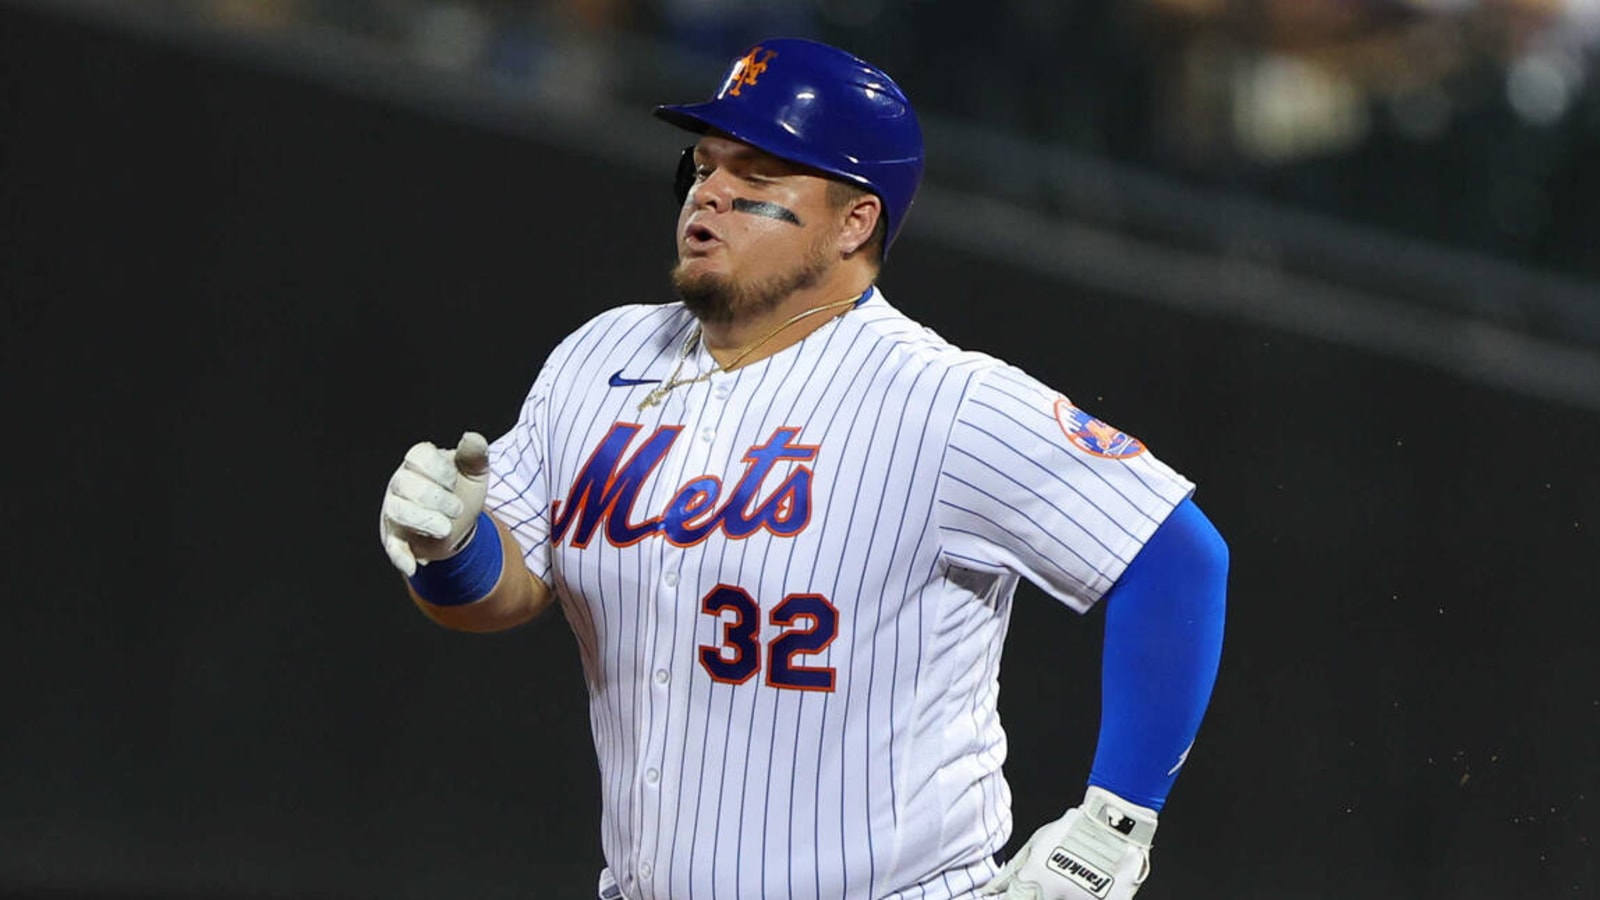 Mets' Daniel Vogelbach channels inner Edwin Diaz with epic walk-up song